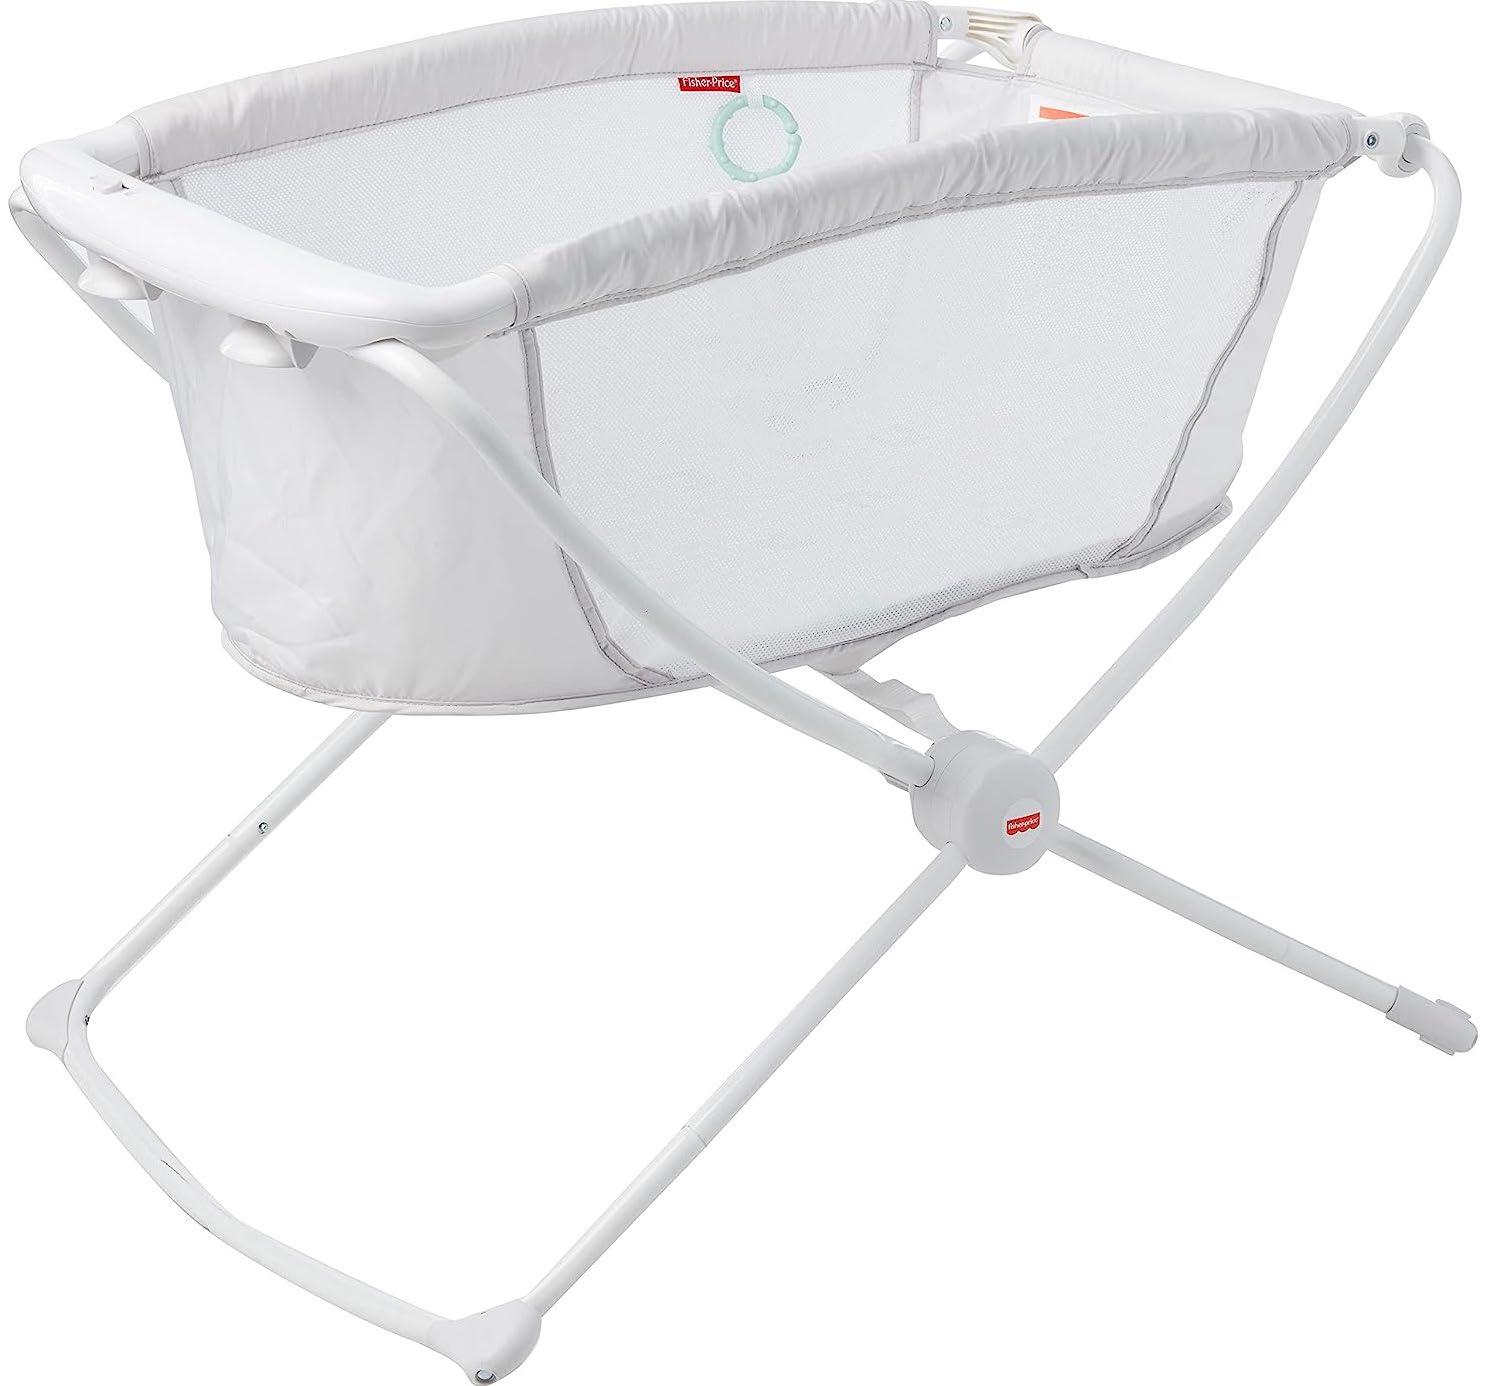 Fisher-Price Rock With Me Bassinet